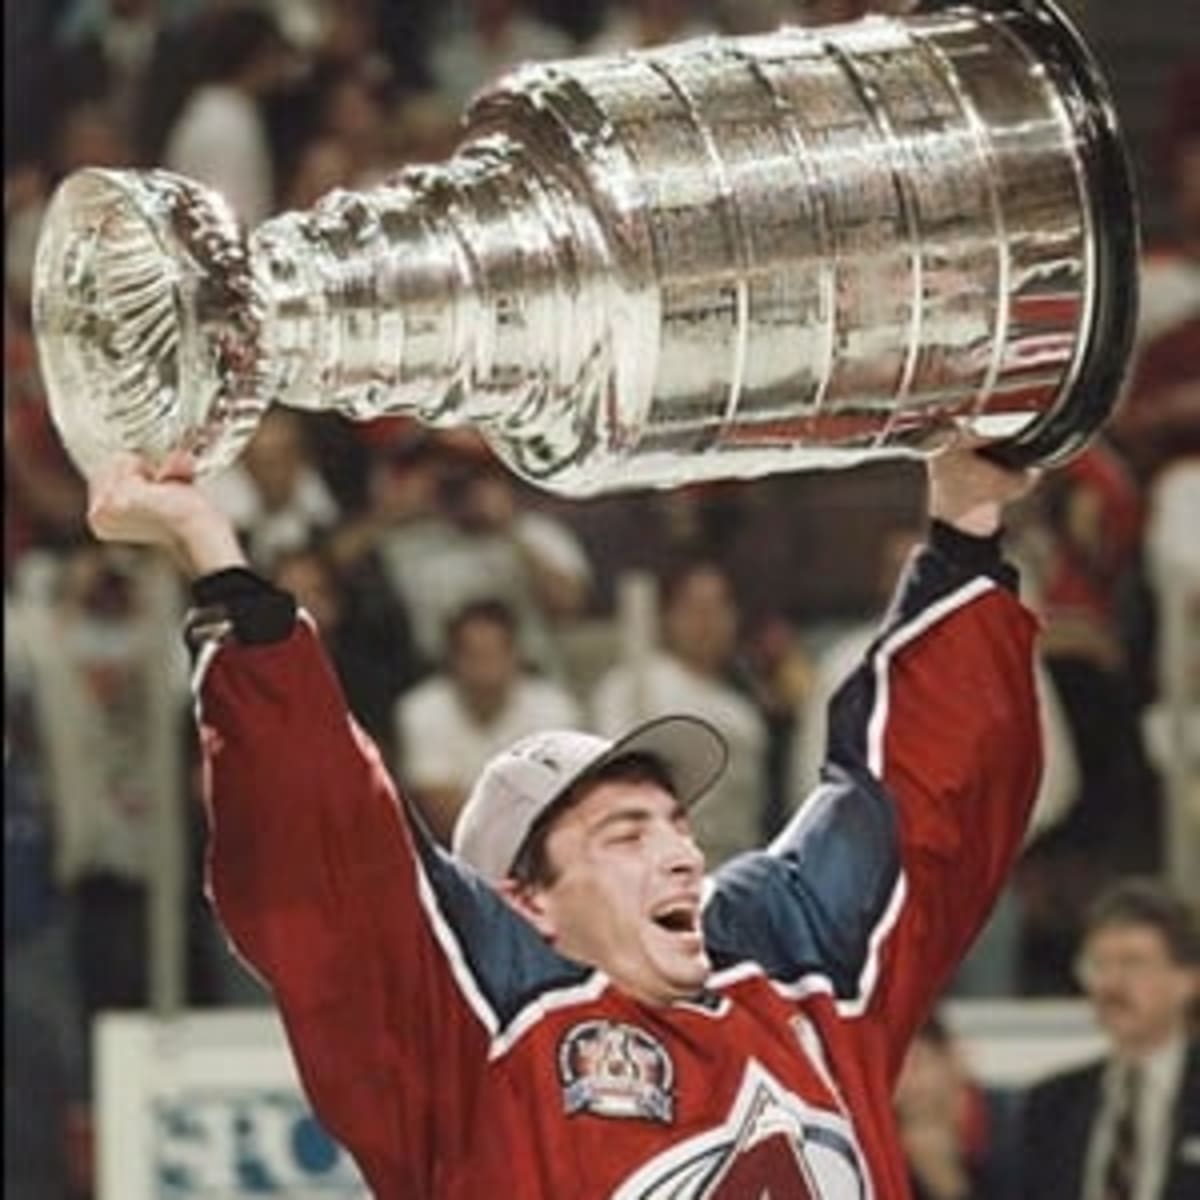 Dater Column: Joe Sakic Going All In on a Stanley Cup in 2022